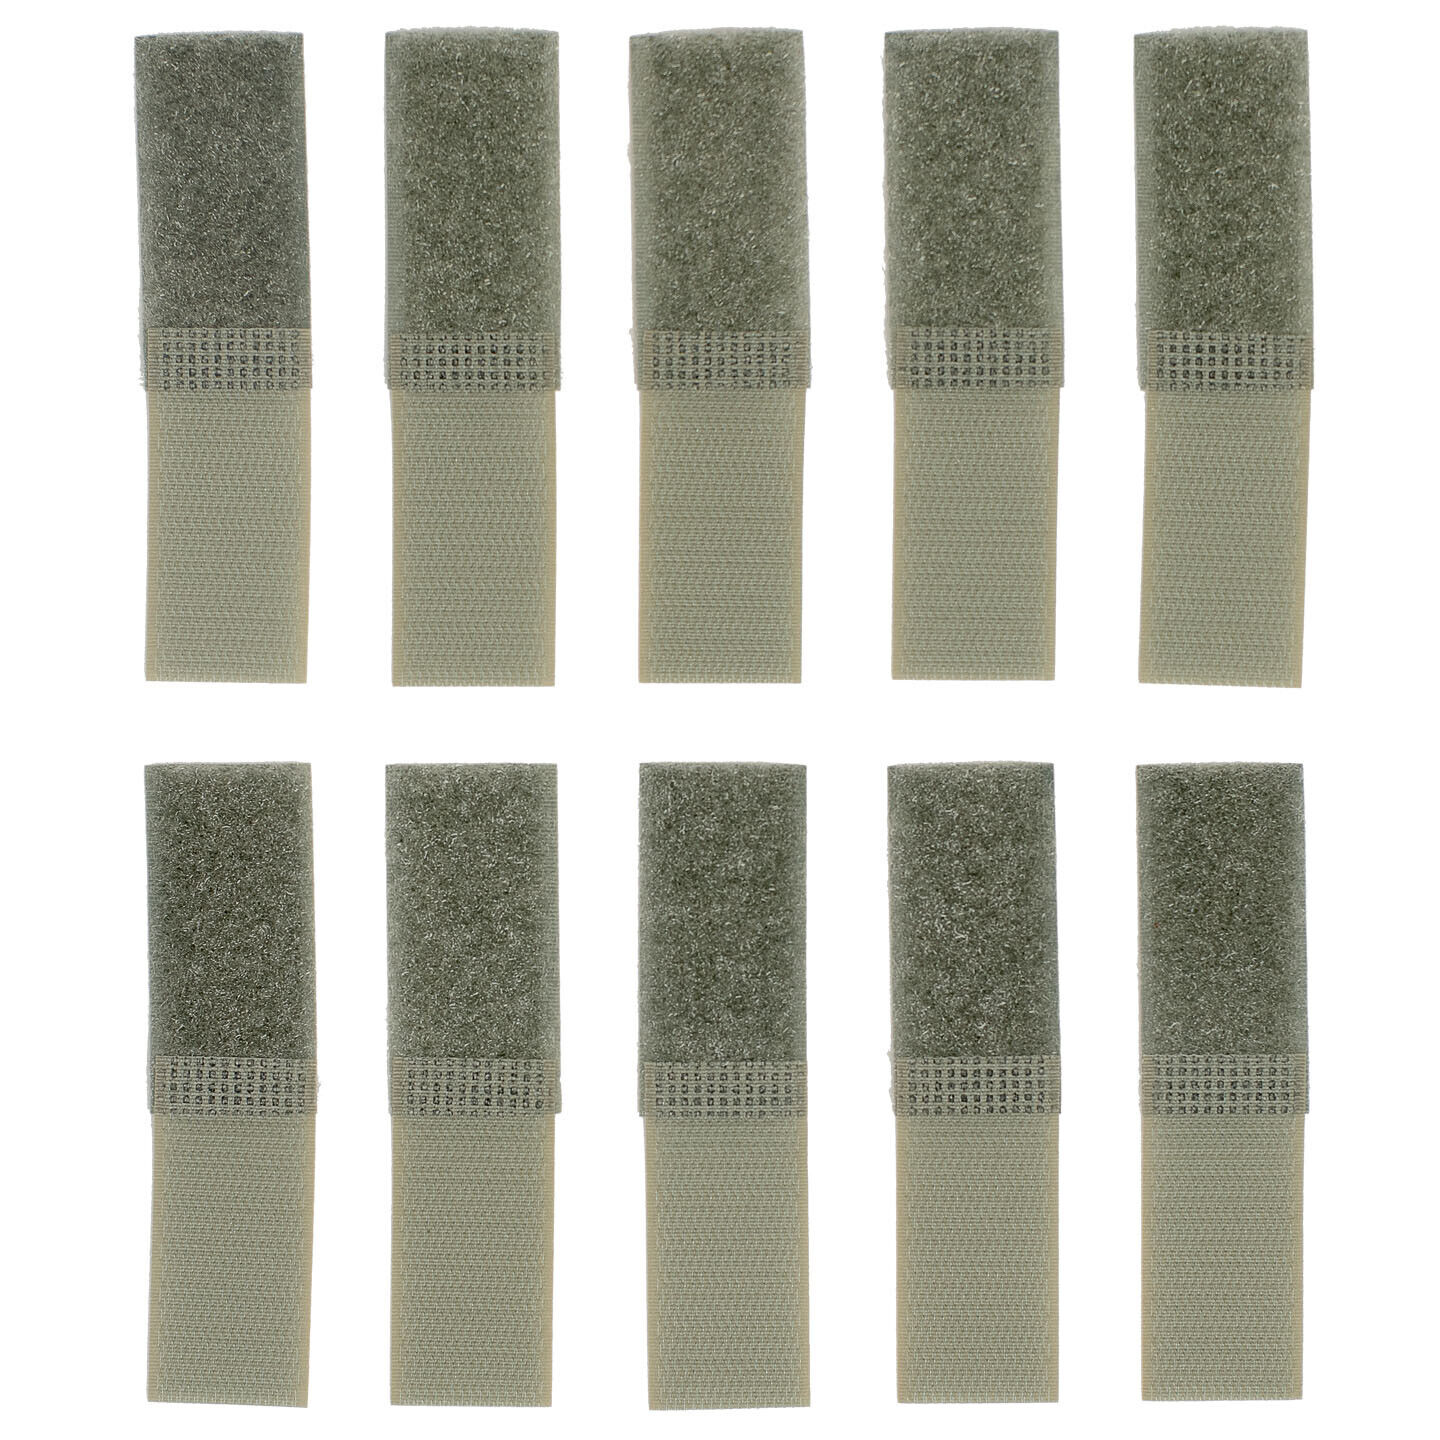 Official VELCRO® Webbing Keepers for MOLLE Tactical Ruck Packs - Foliage Green